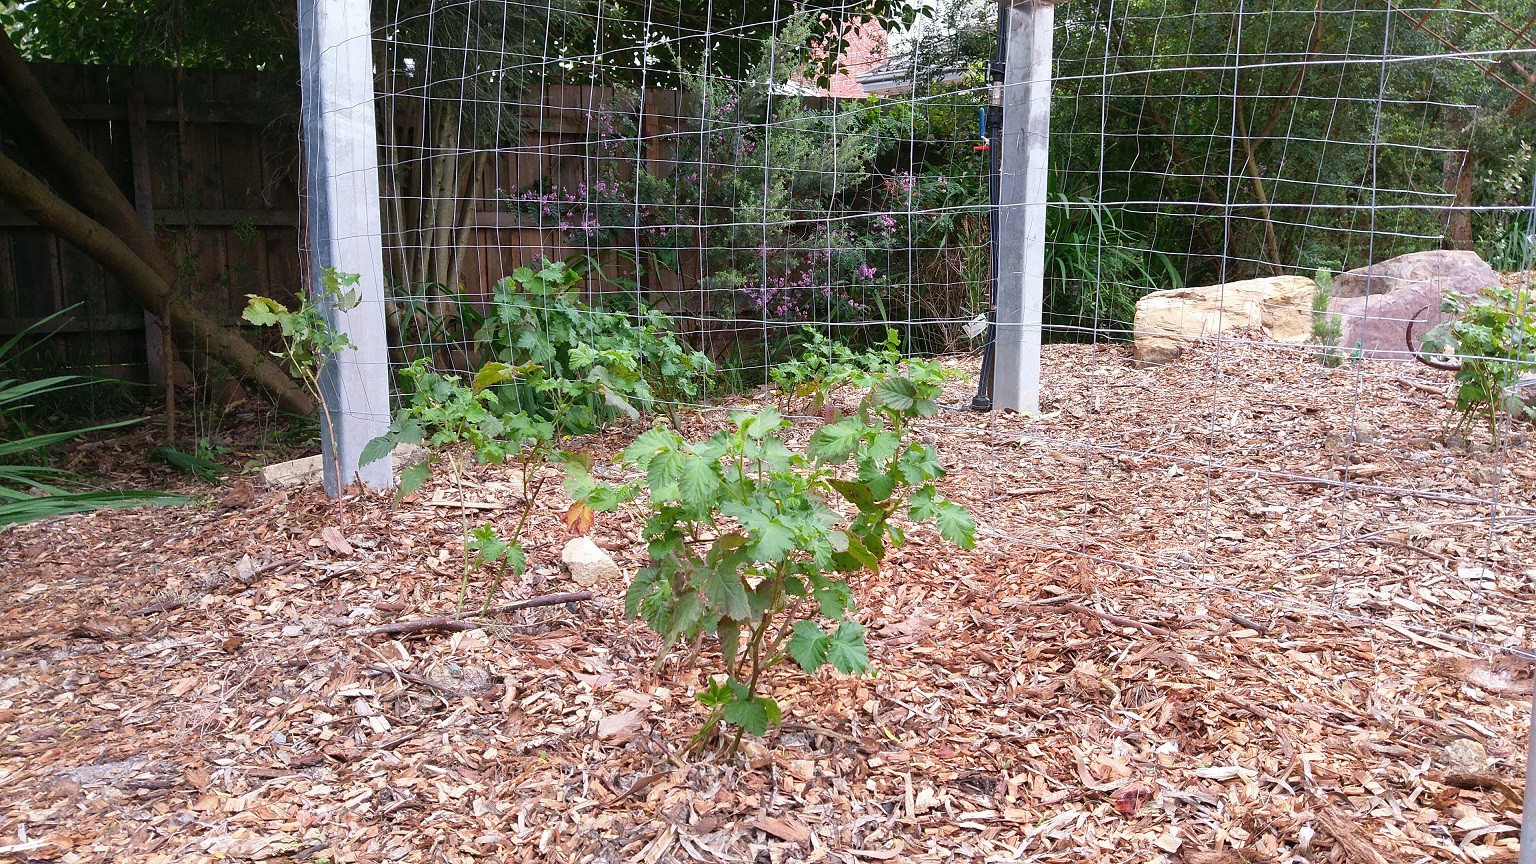 Raspberry and loganberry plants getting started on wire mesh